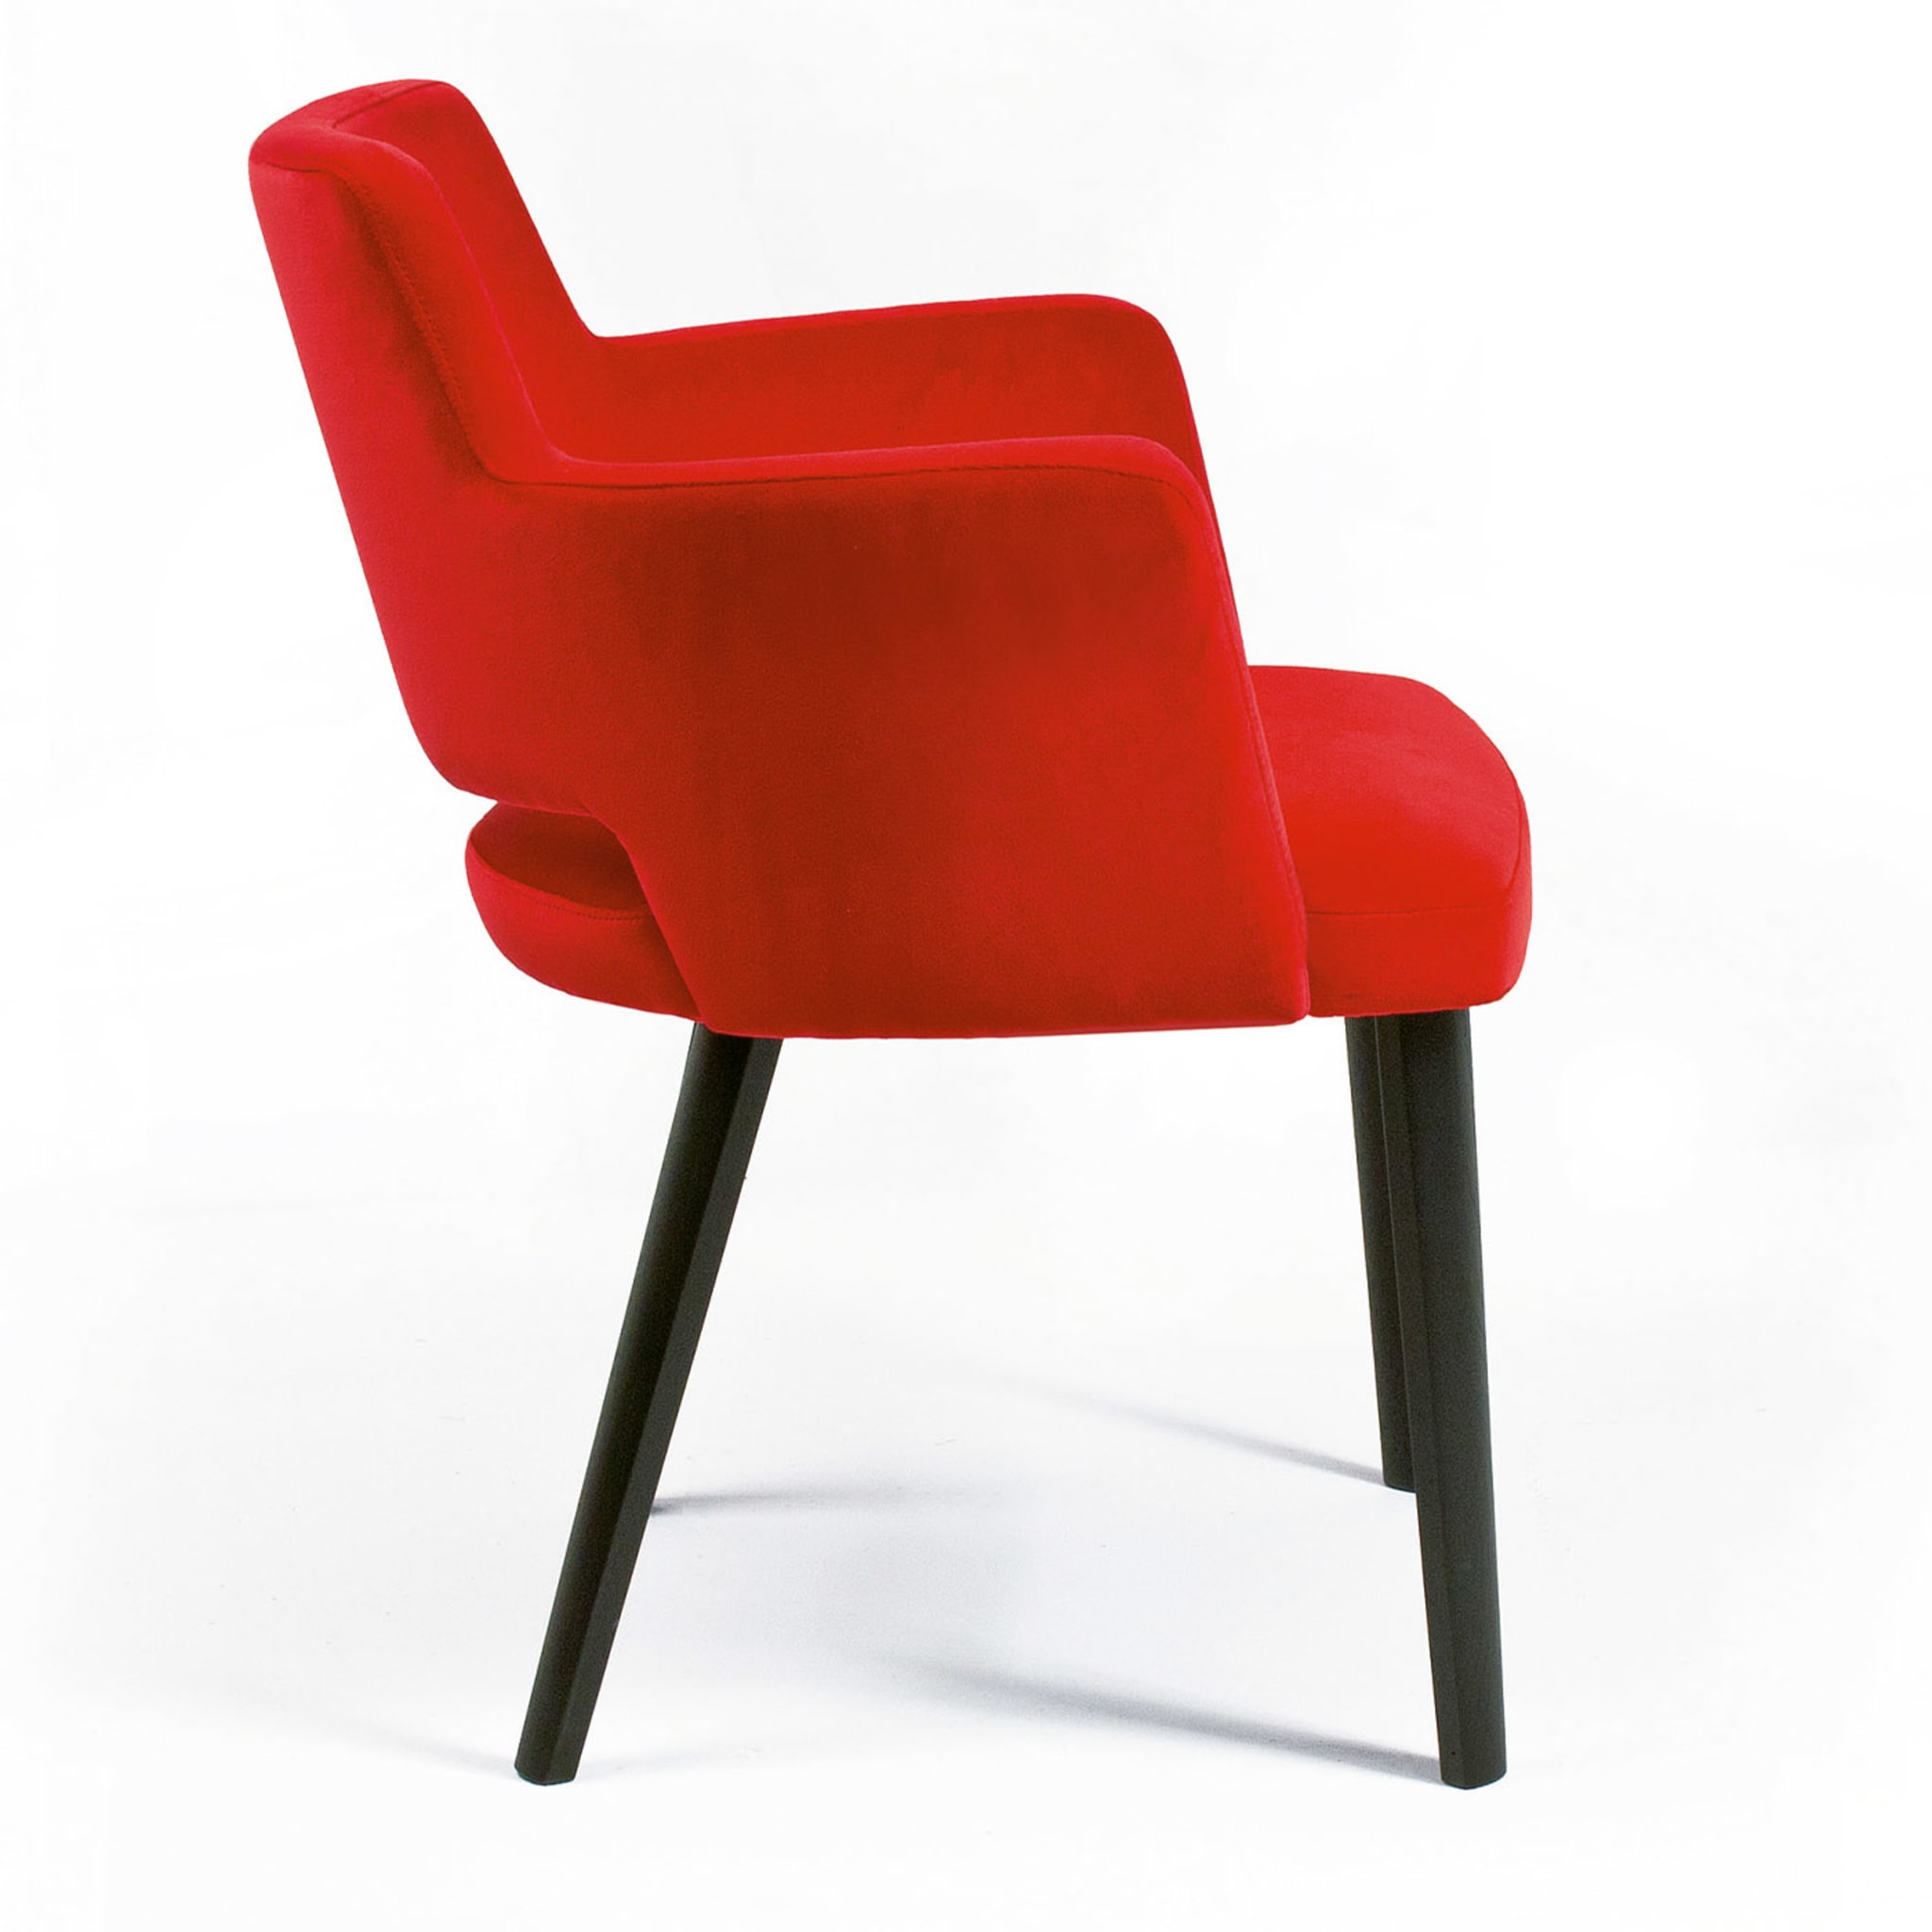 Grace.p Chinese-Red Armchair - Alternative view 1